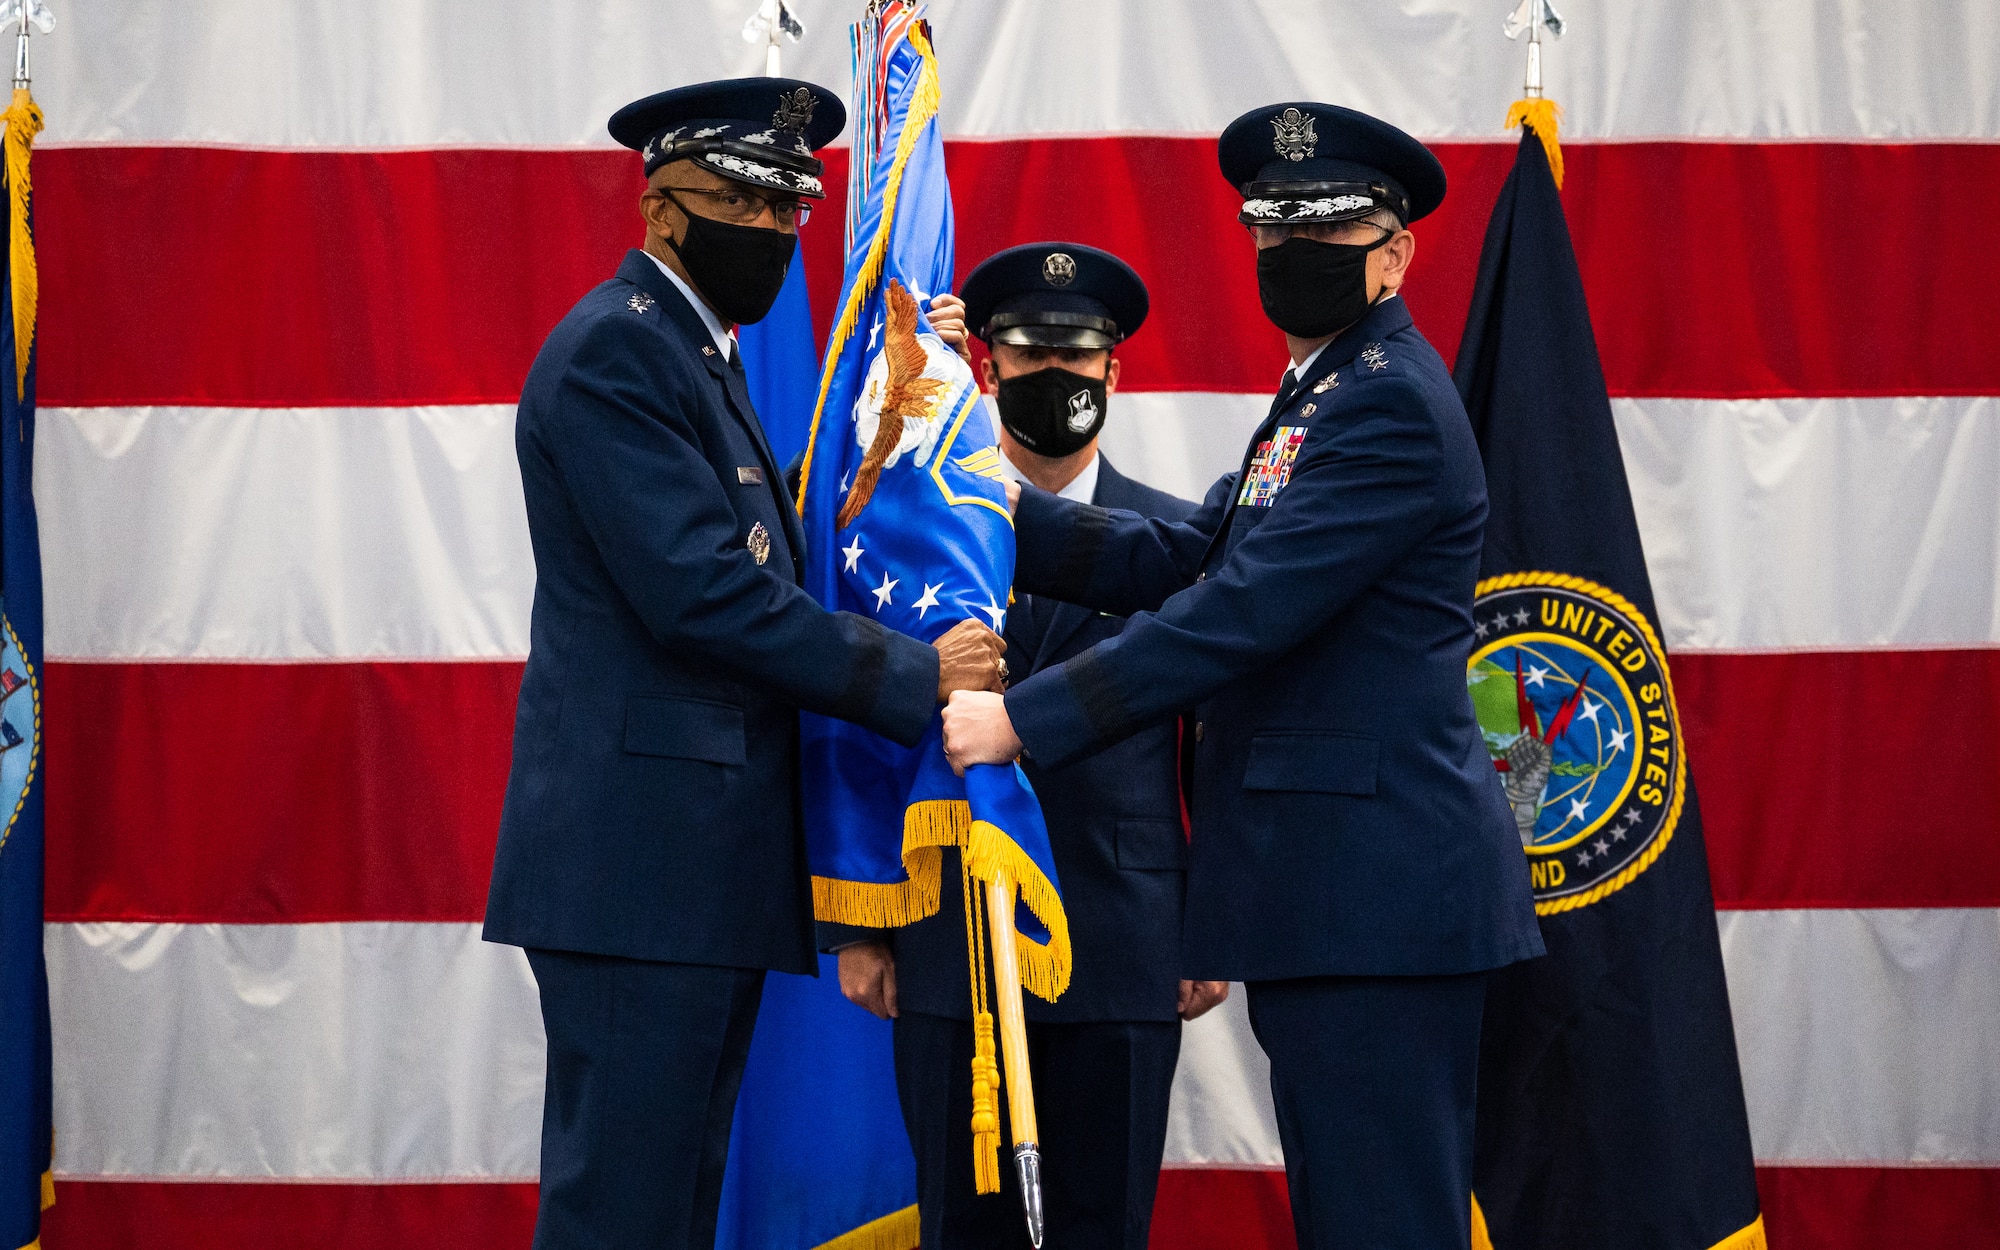 Gen. Tim Ray, right, outgoing Air Force Global Strike Command commander, relinquishes the guidon to Air Force Chief of Staff Gen. CQ Brown, Jr., left, during the AFGSC change of command ceremony at Barksdale Air Force Base, Louisiana, Aug. 27, 2021. The passing of a unit’s guidon symbolizes a transfer of command. (U.S. Air Force photo by Senior Airman Jacob B. Wrightsman)